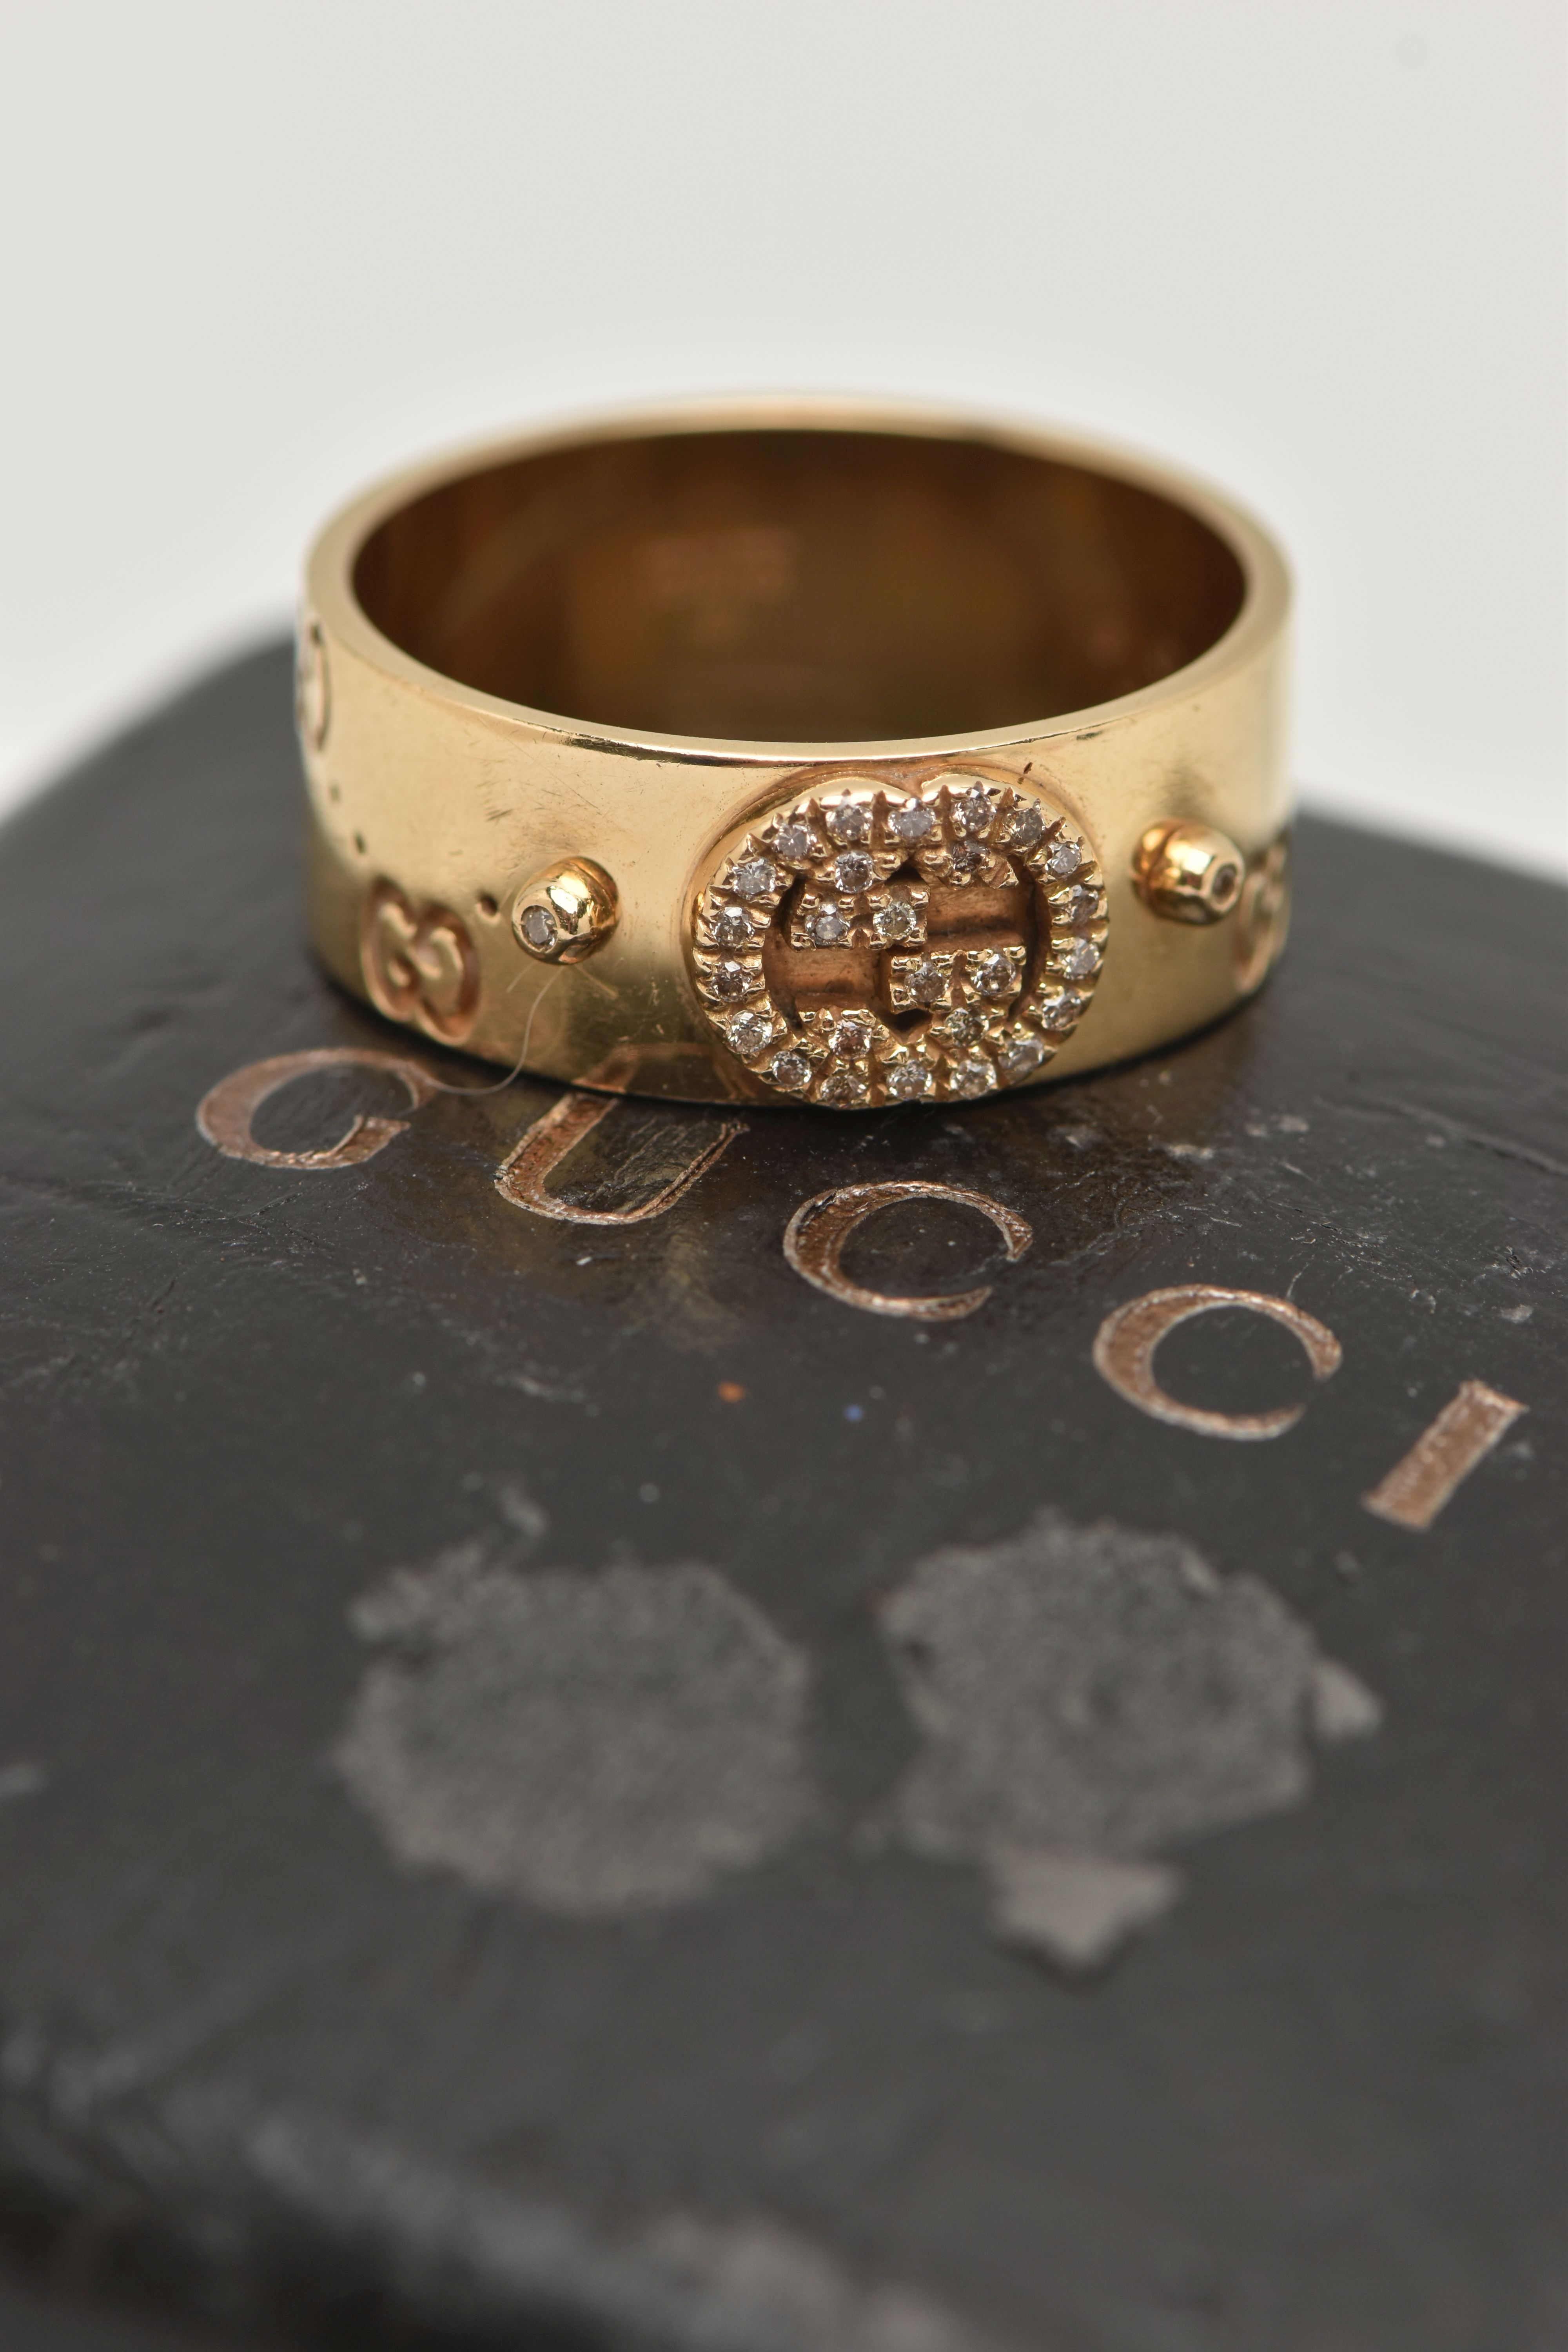 AN 18CT GOLD 'GUCCI' ICON BAND RING, a wide yellow metal band with a repetitive 'Gucci' logo and a - Image 5 of 5